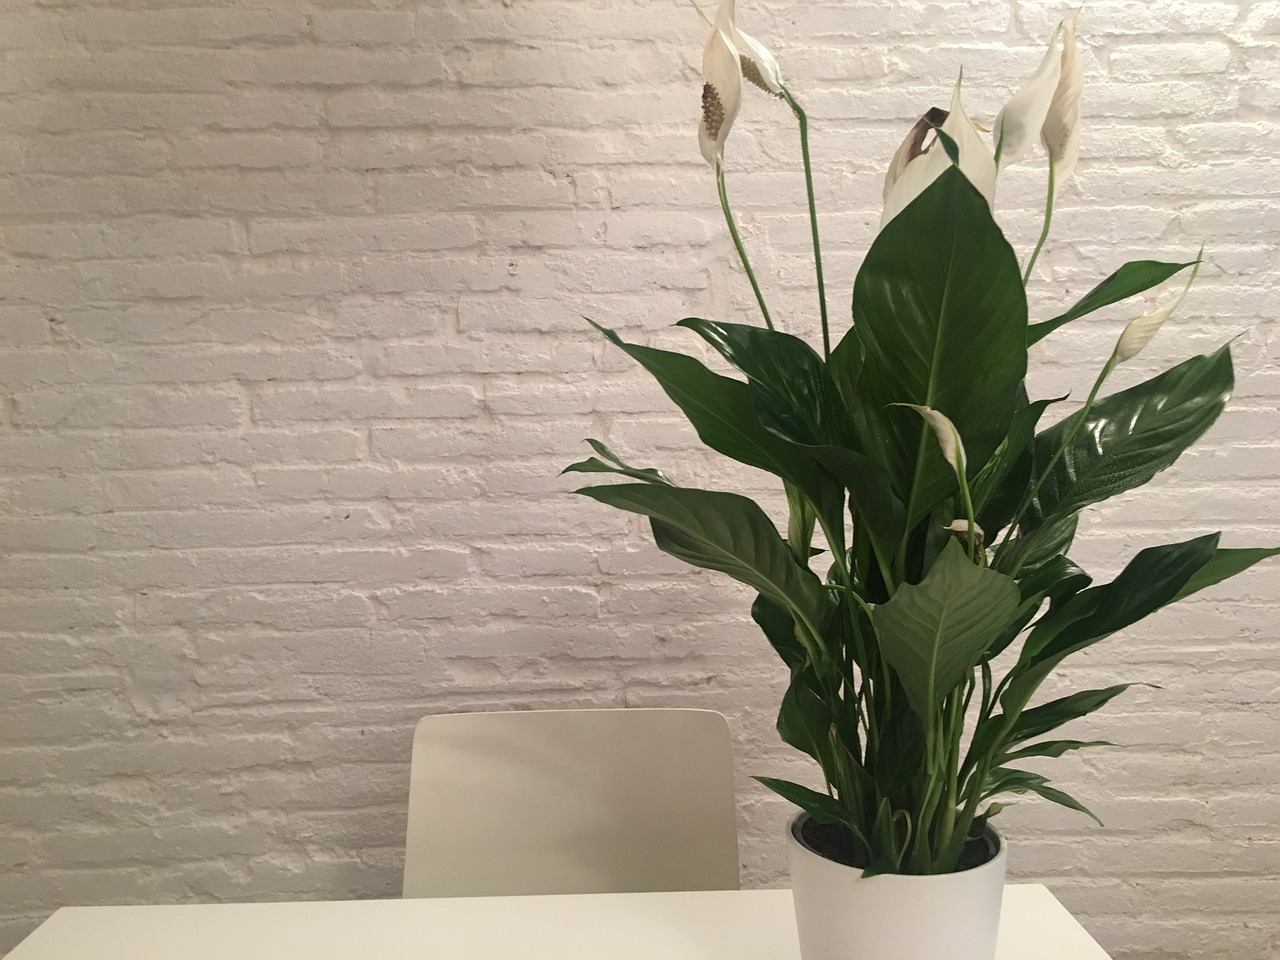 Add freshness and purity to your home with a peace lily